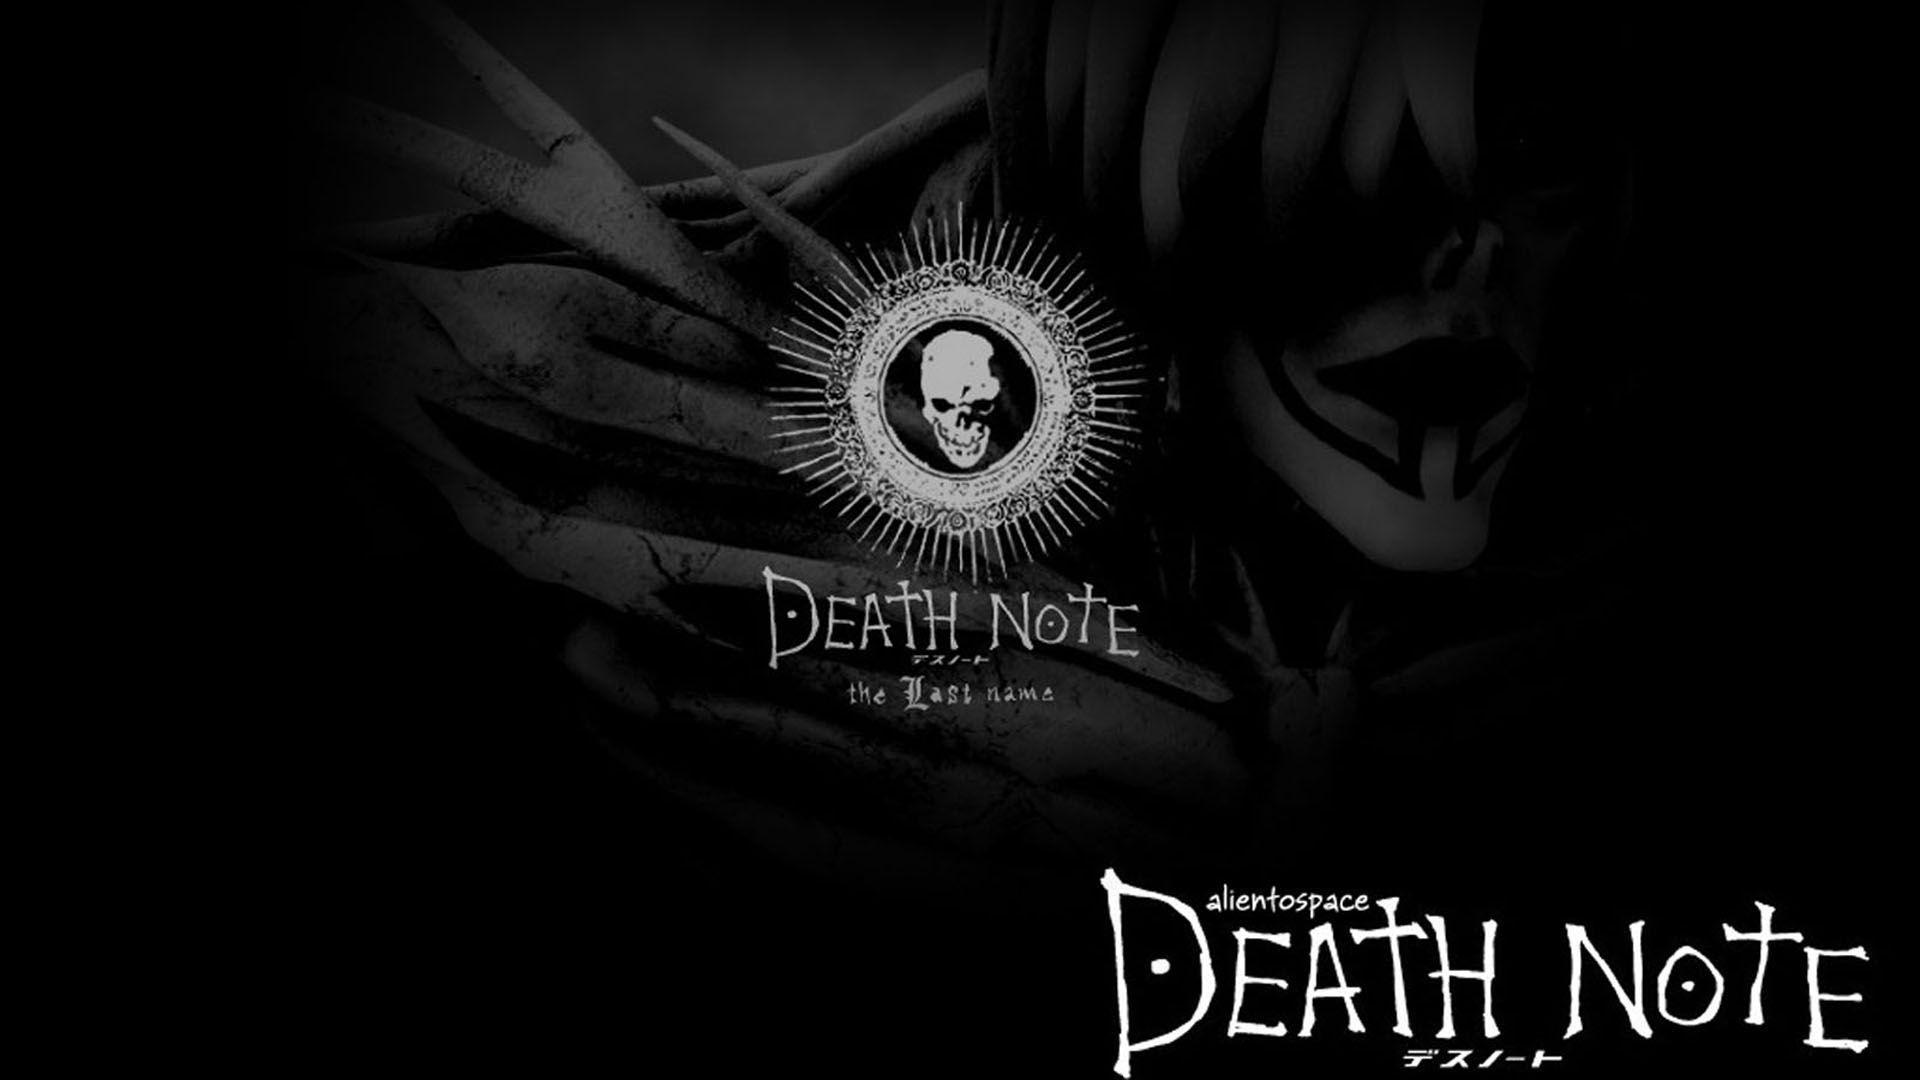 Mesmerizing Death Note Wallpaper Free Download 1920x1080PX Death